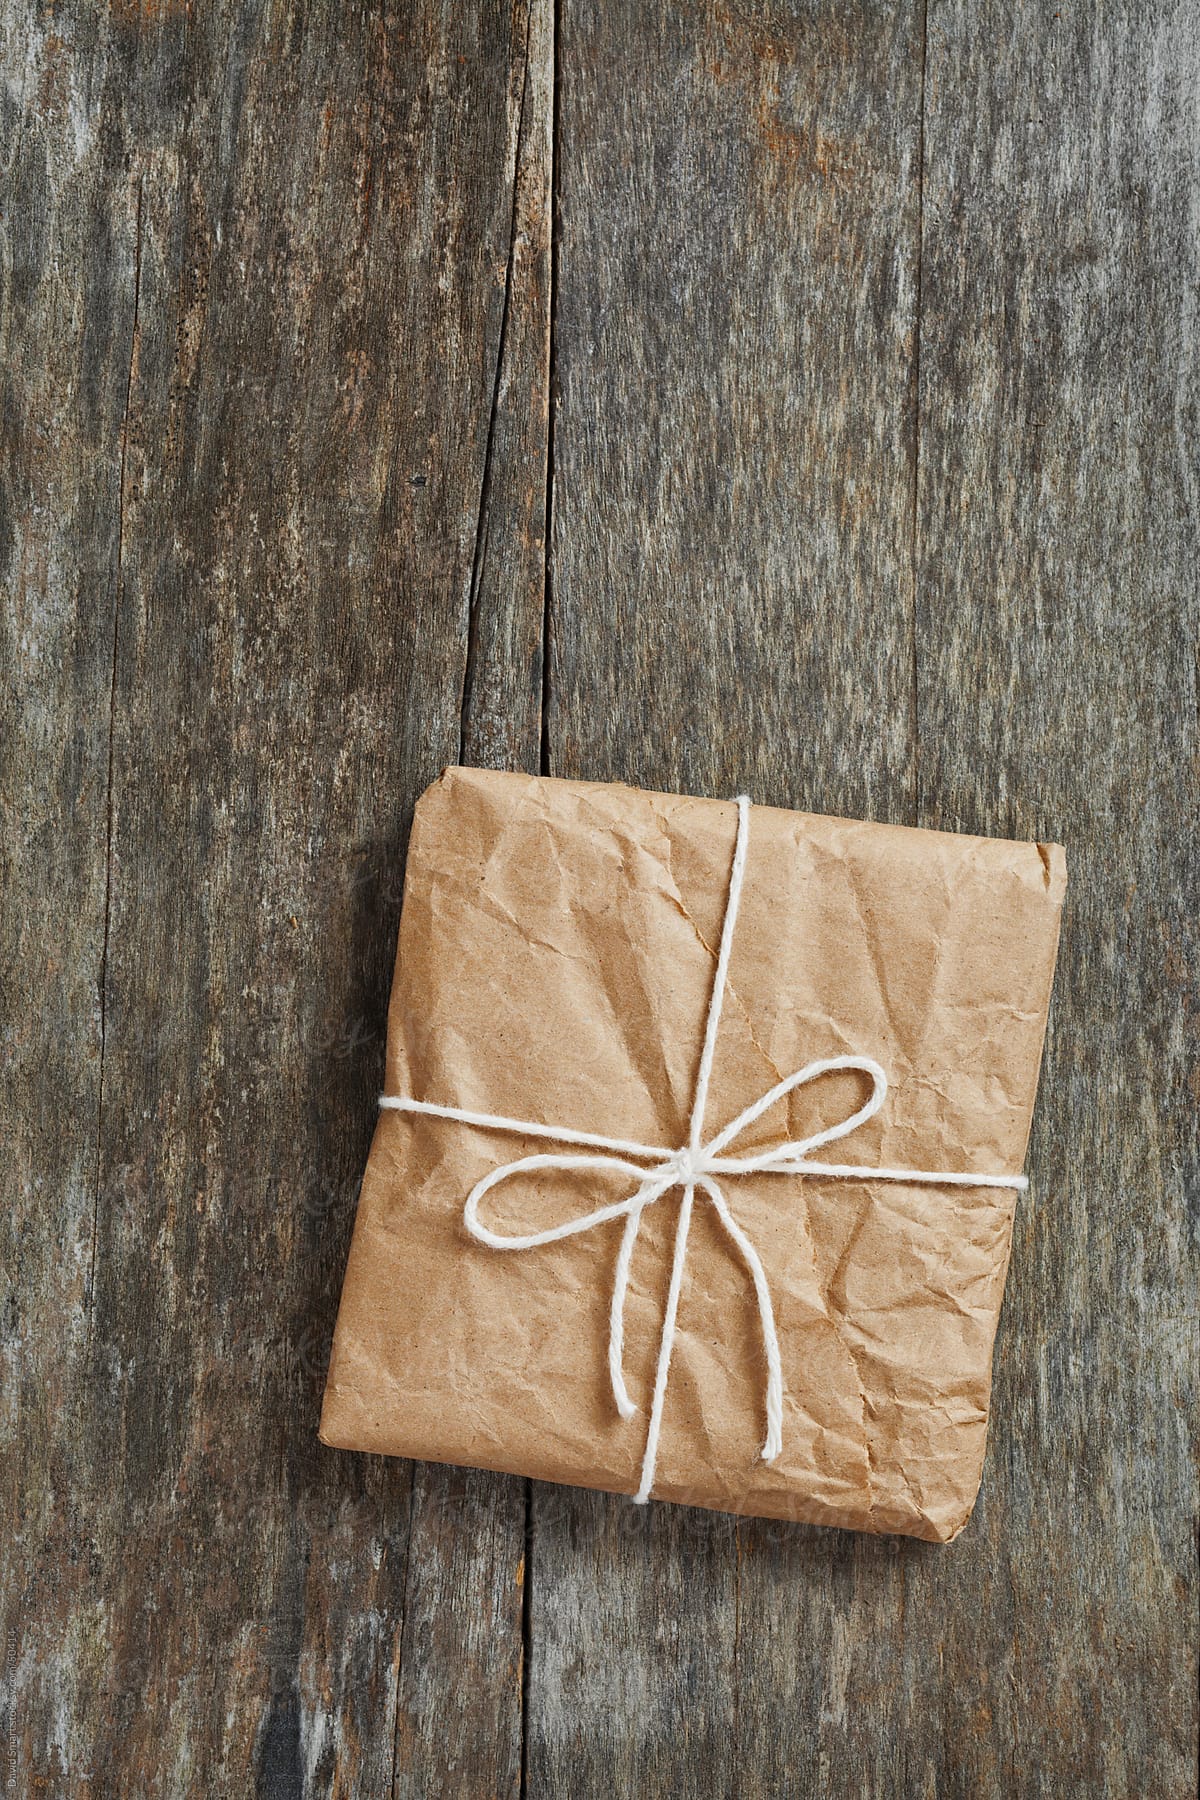 Package wrapped in brown paper on weathered wood